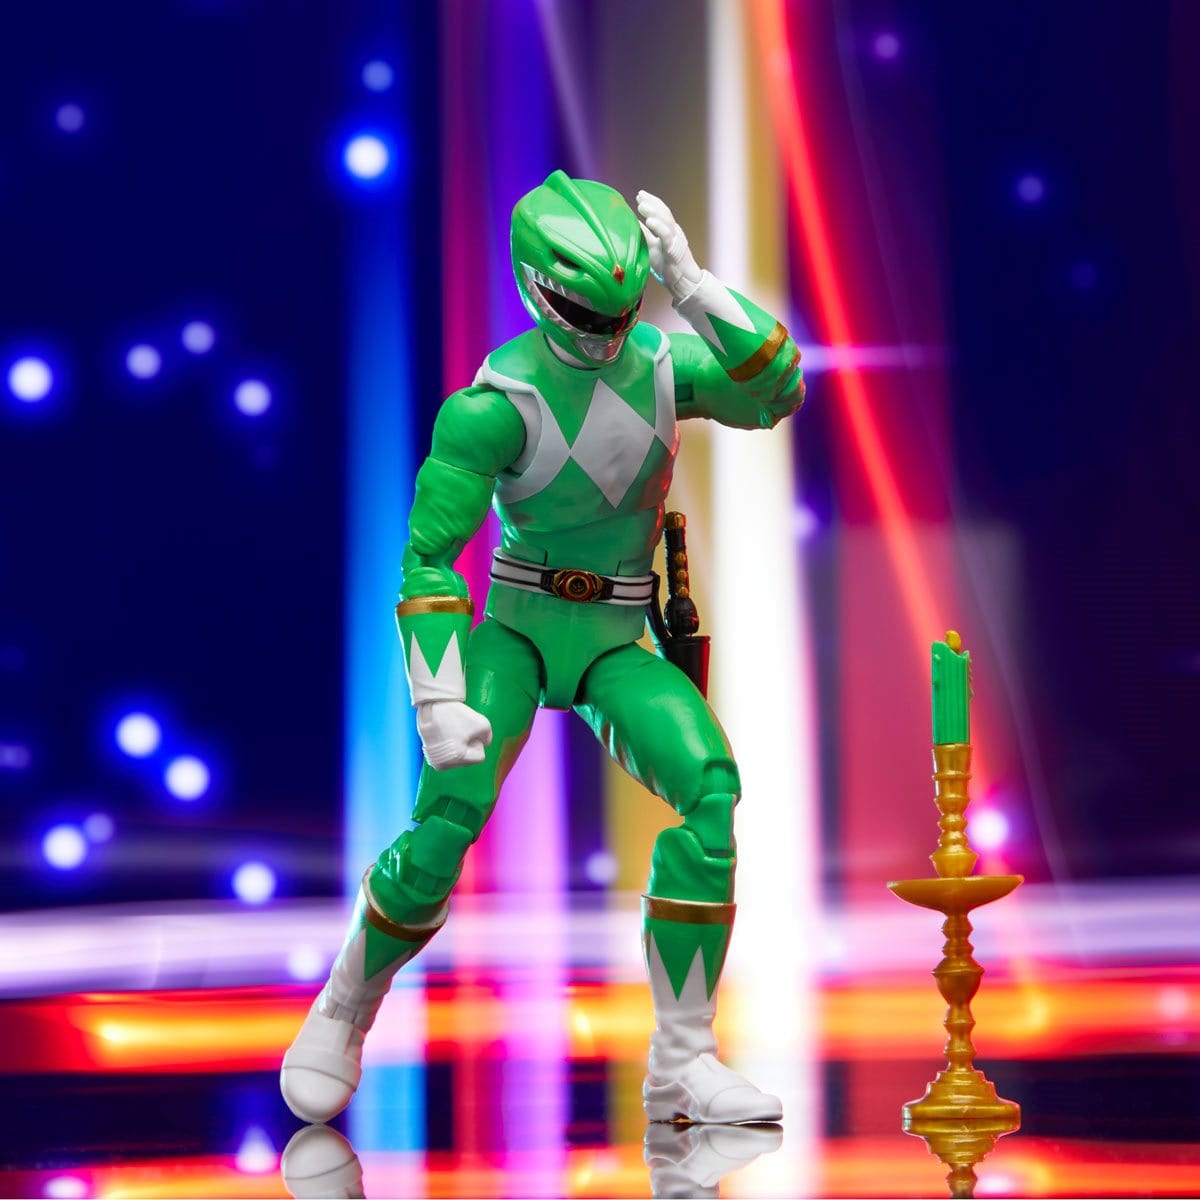 Power Rangers Lightning Collection Remastered Mighty Morphin Green Ranger 6-Inch Action Figure